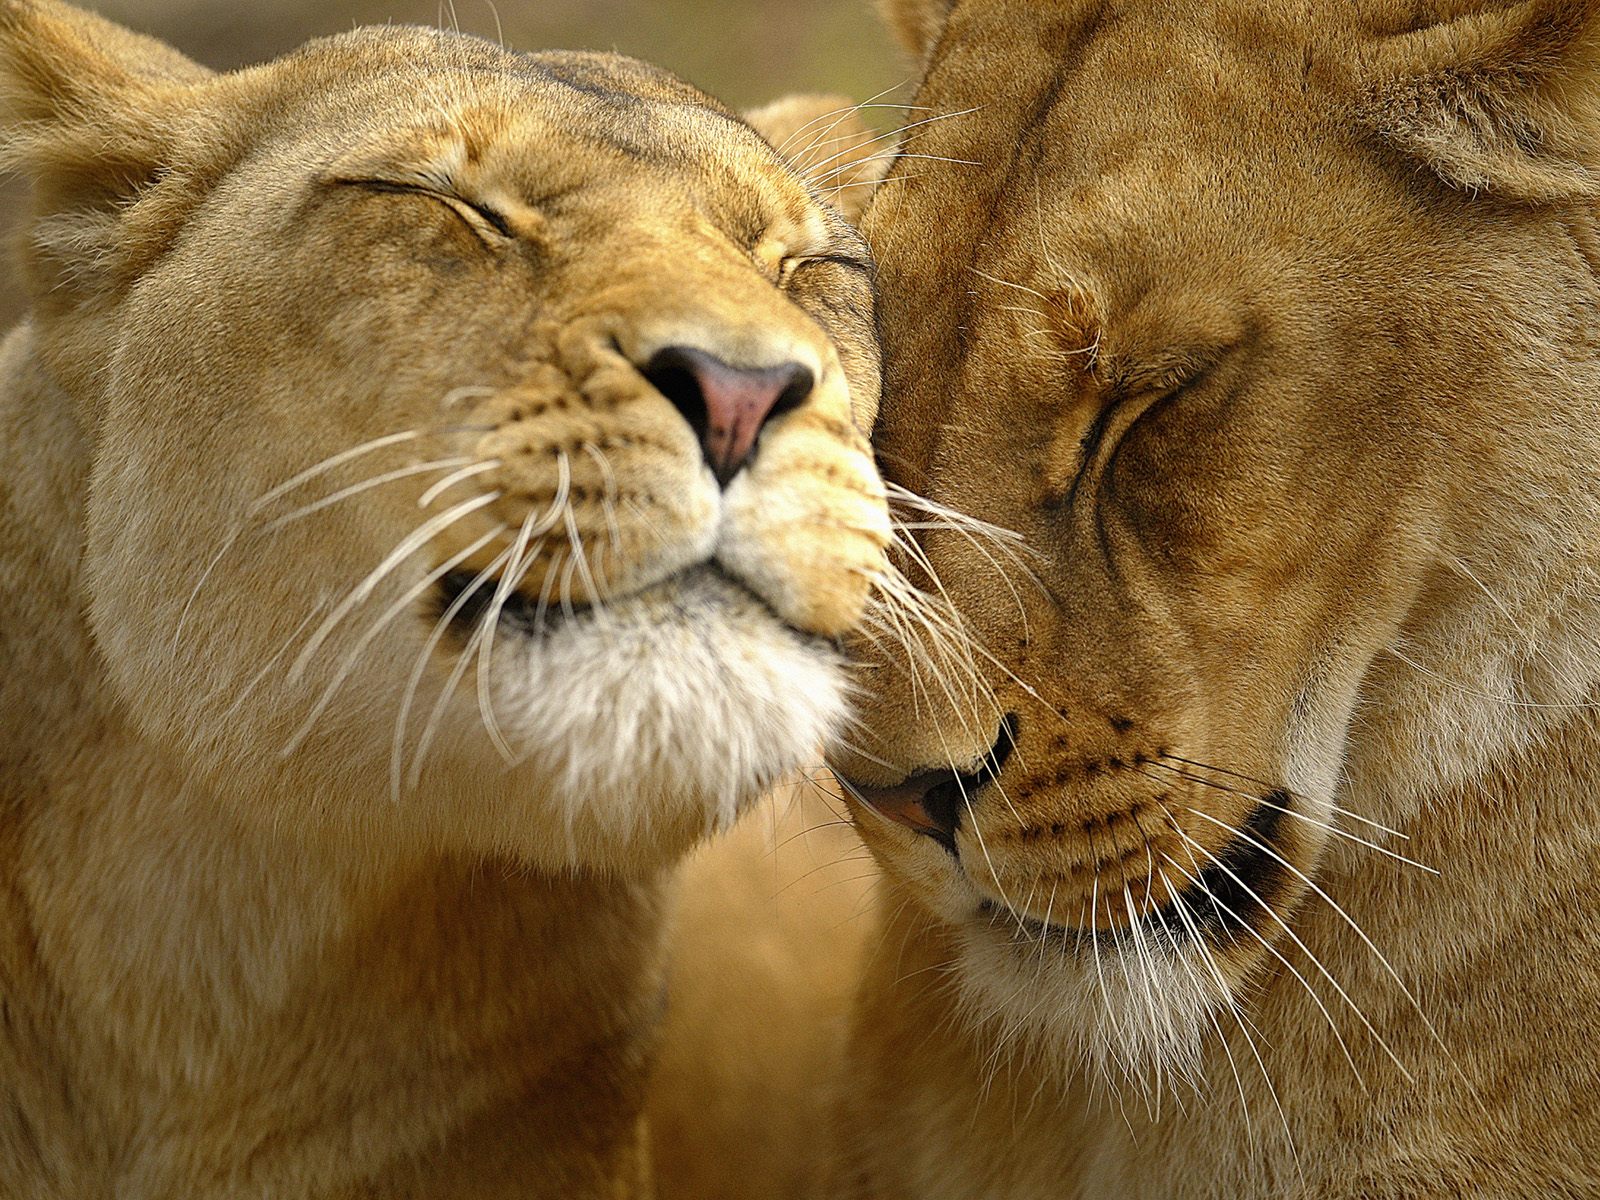 ENCYCLOPEDIA OF ANIMAL FACTS AND PICTURES: Pictures of lions1600 x 1200